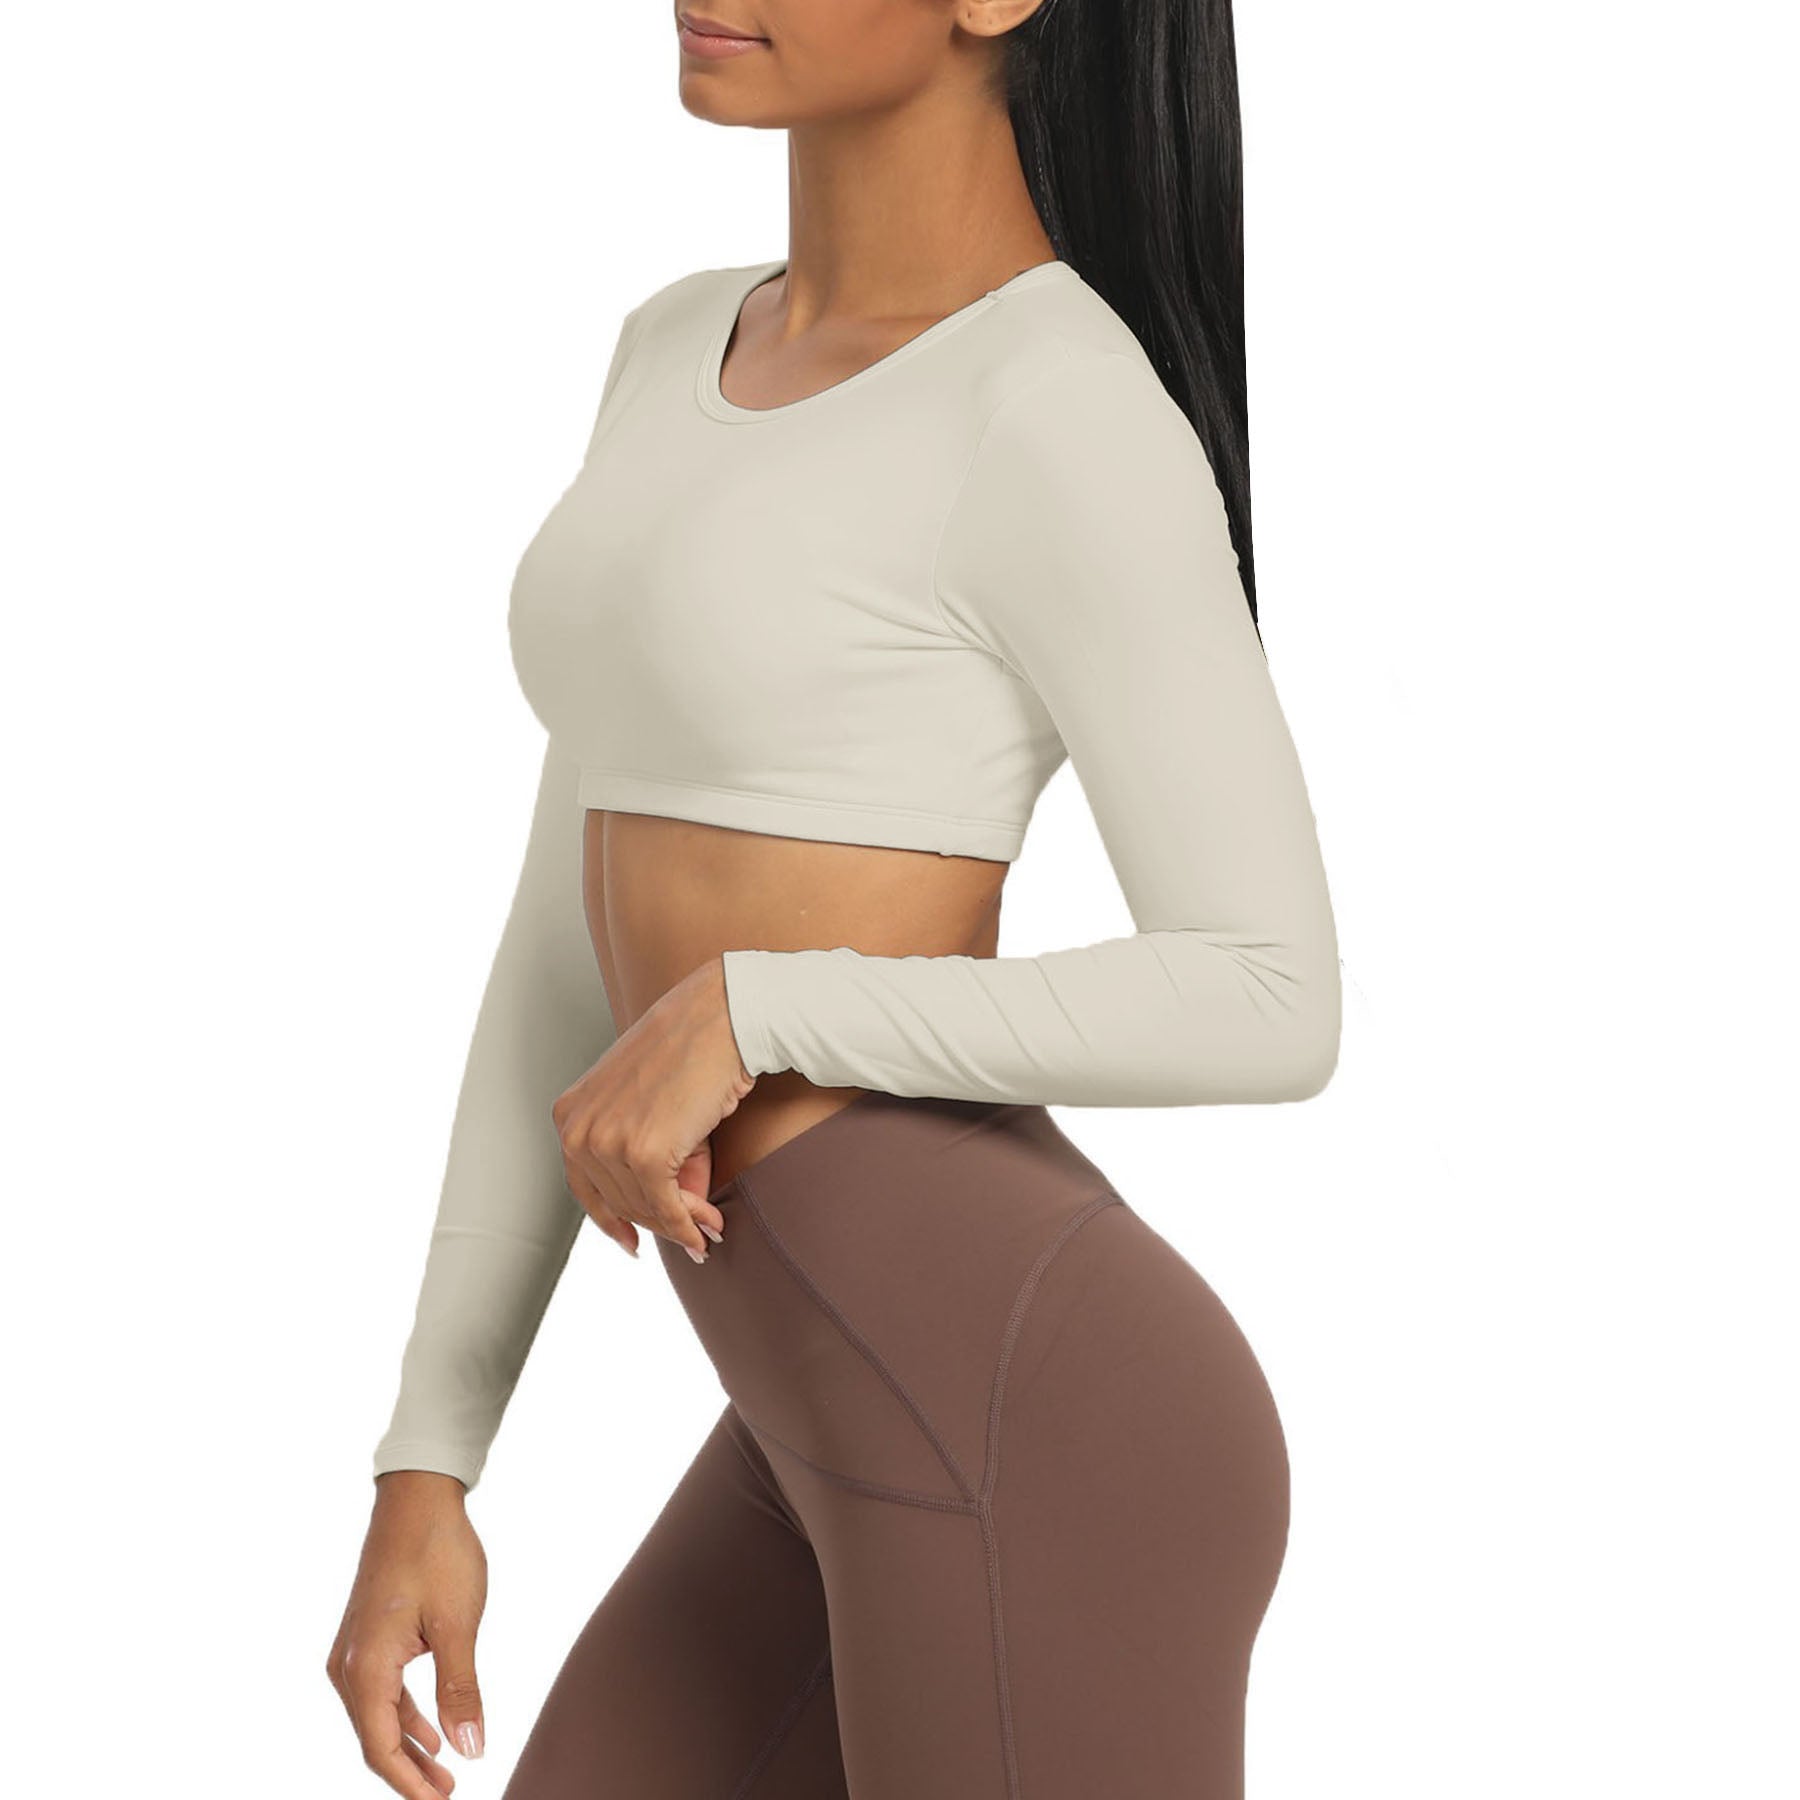 Aoxjox "Hollow Back" Long Sleeve Crop